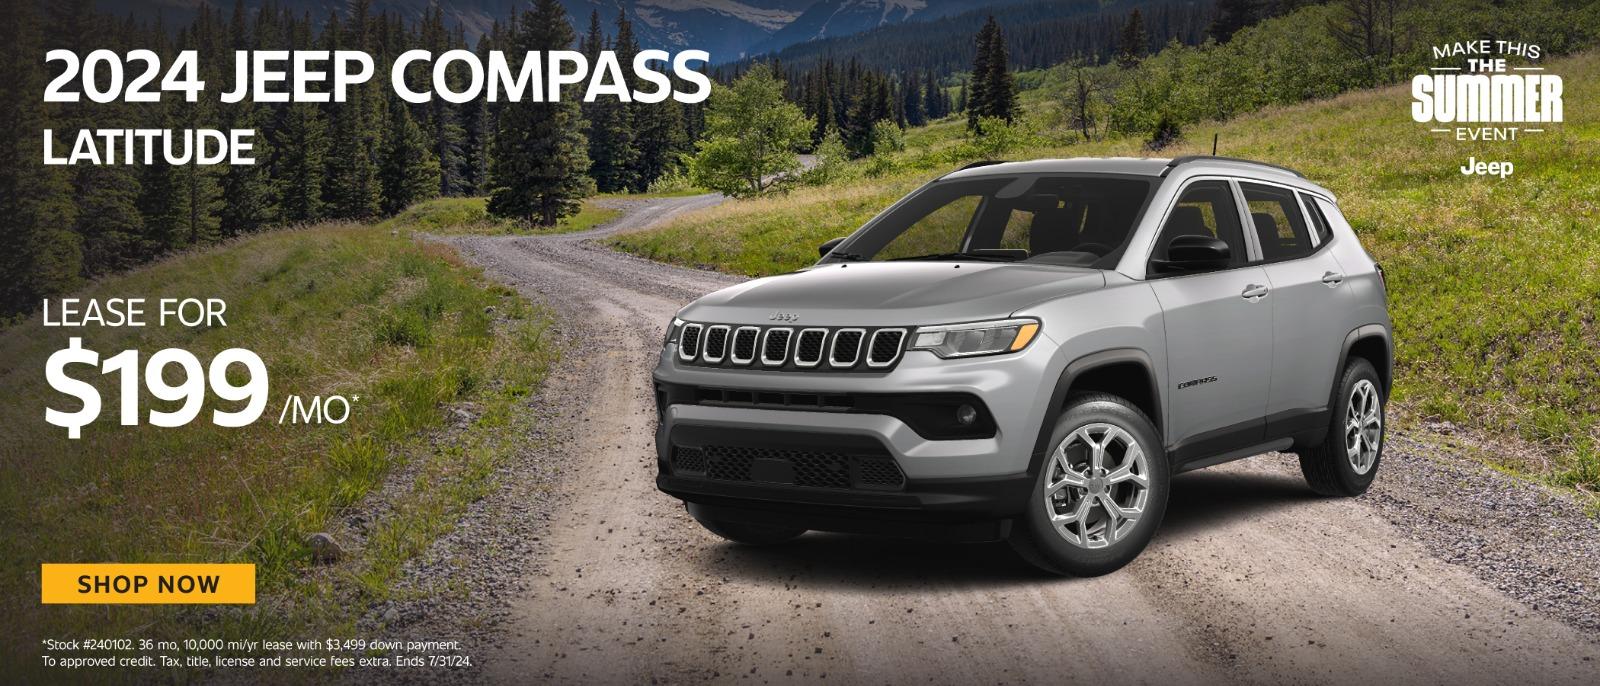 2024 Jeep Compass Latitude 4x4 lease for $199 per month